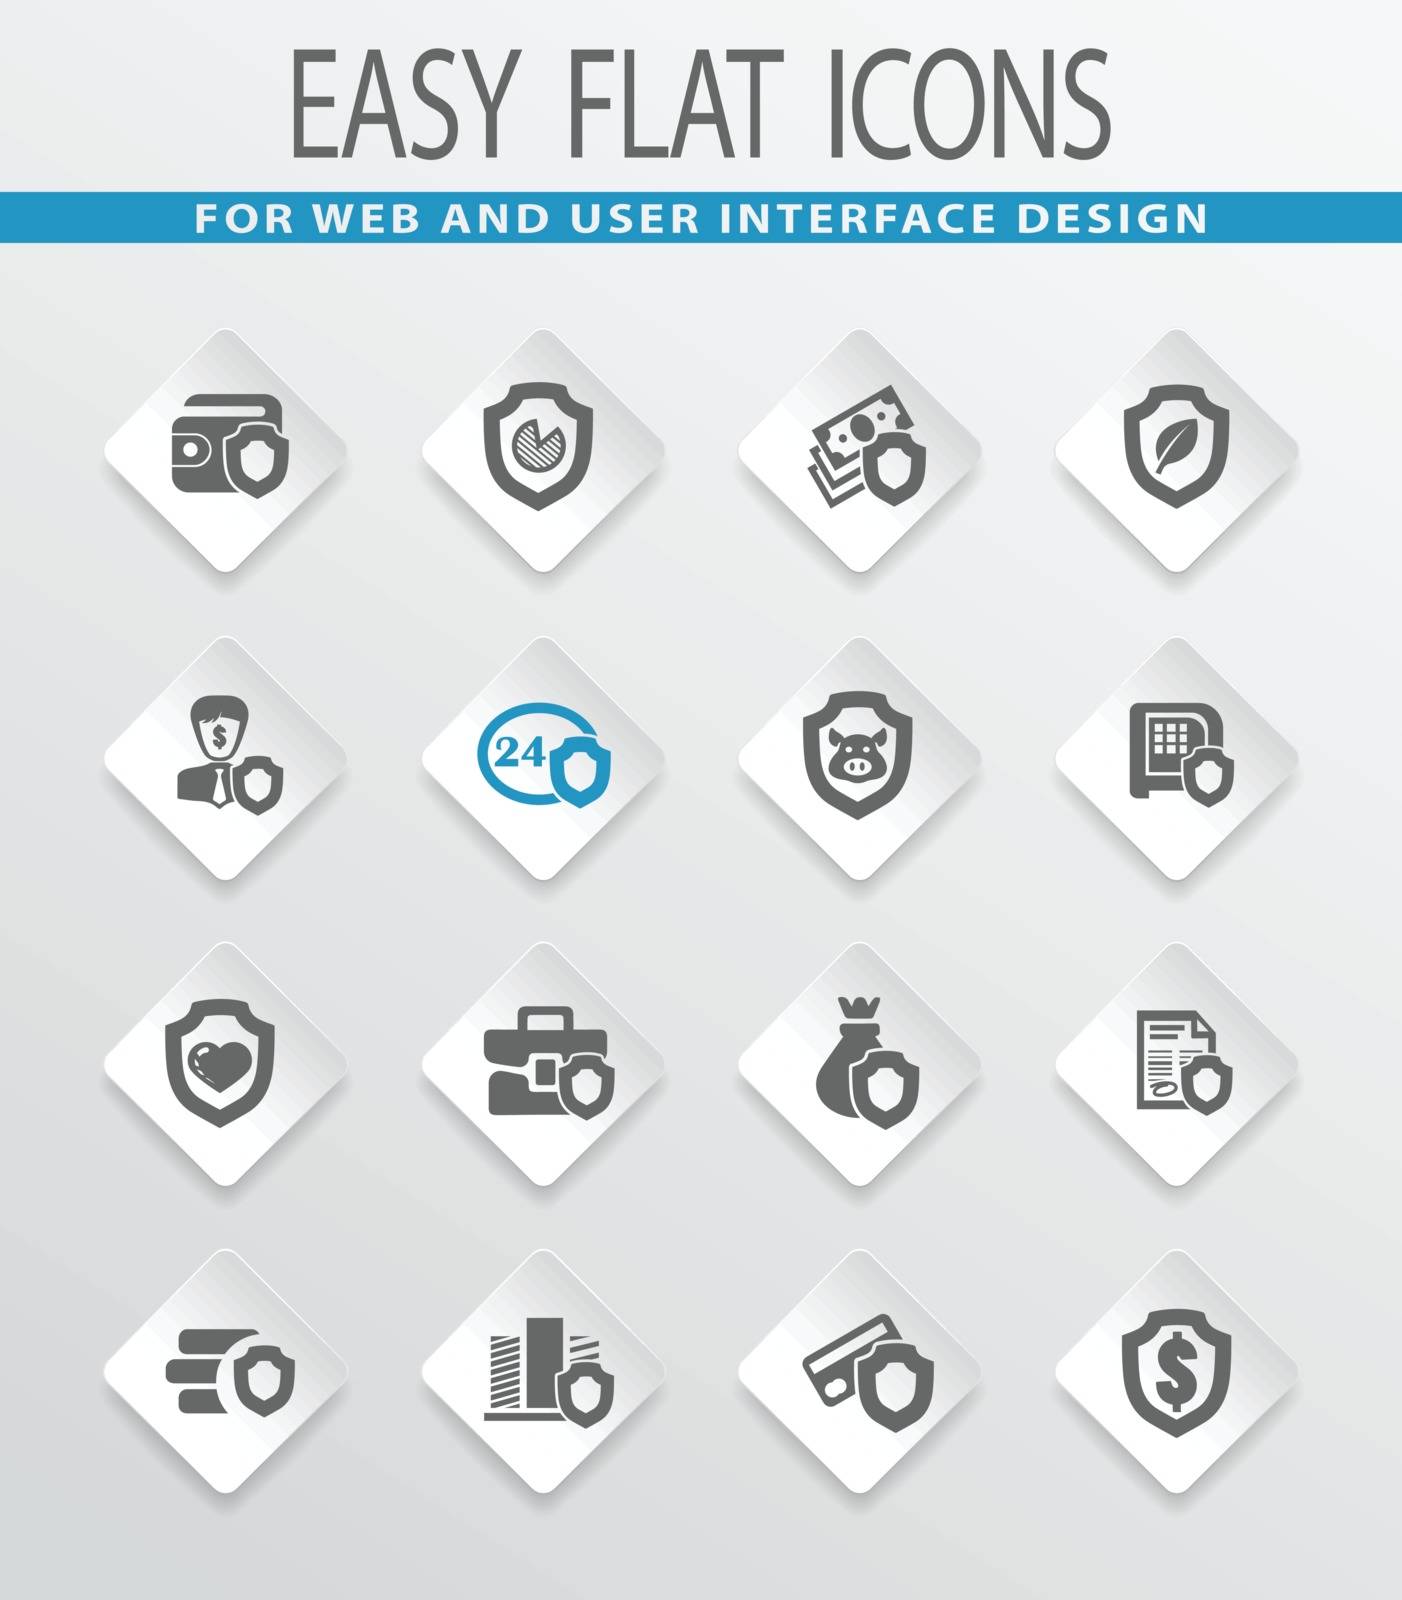 Insurance flat icons set for web sites and user interface